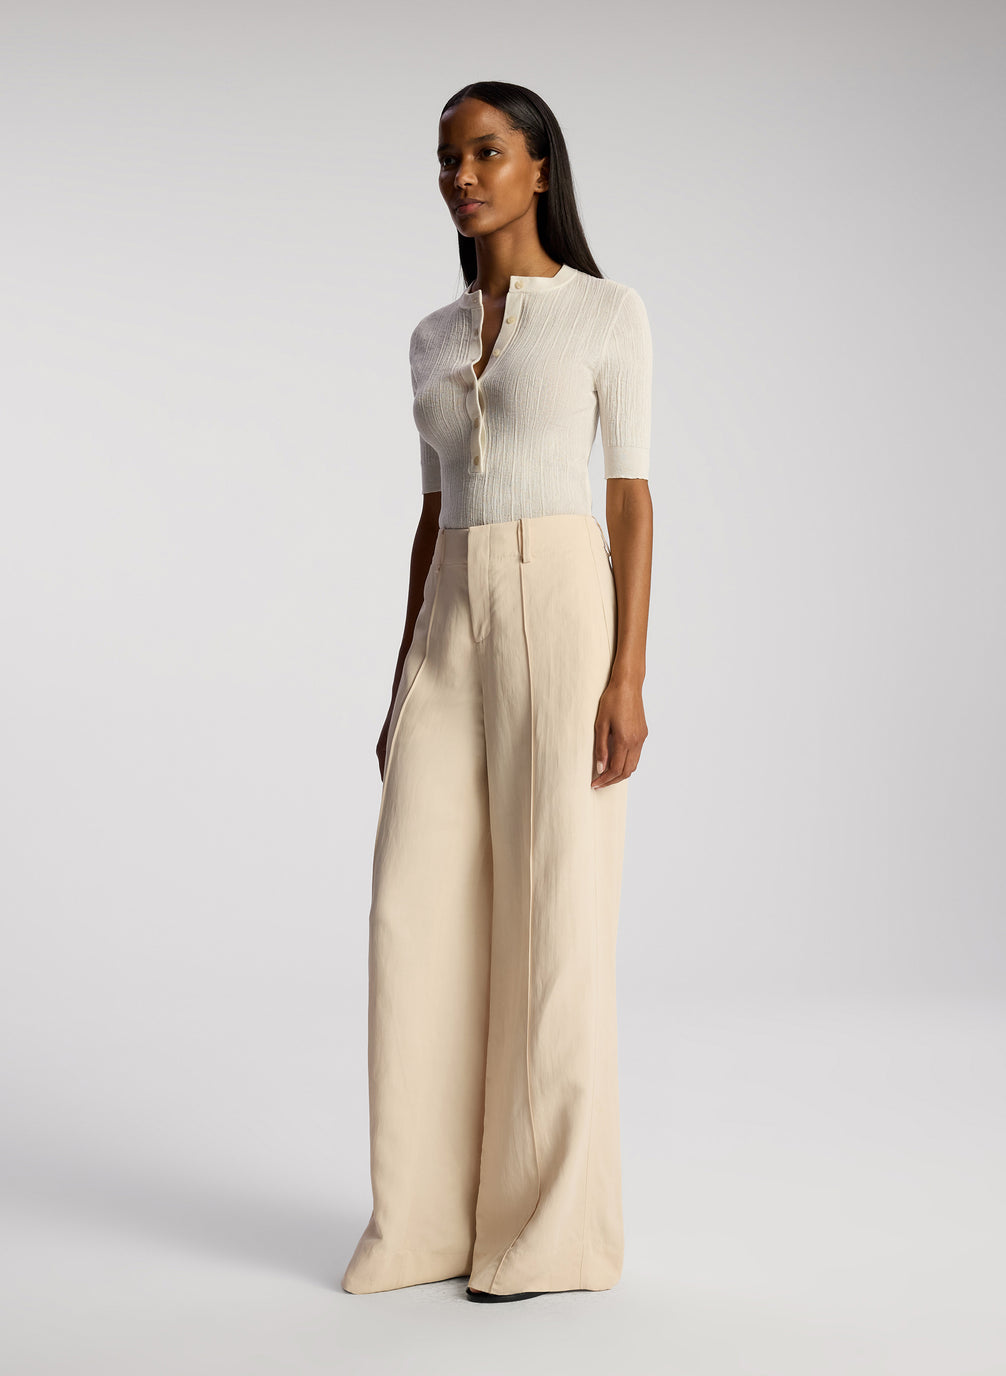 view of woman wearing white top and cream wide leg pants